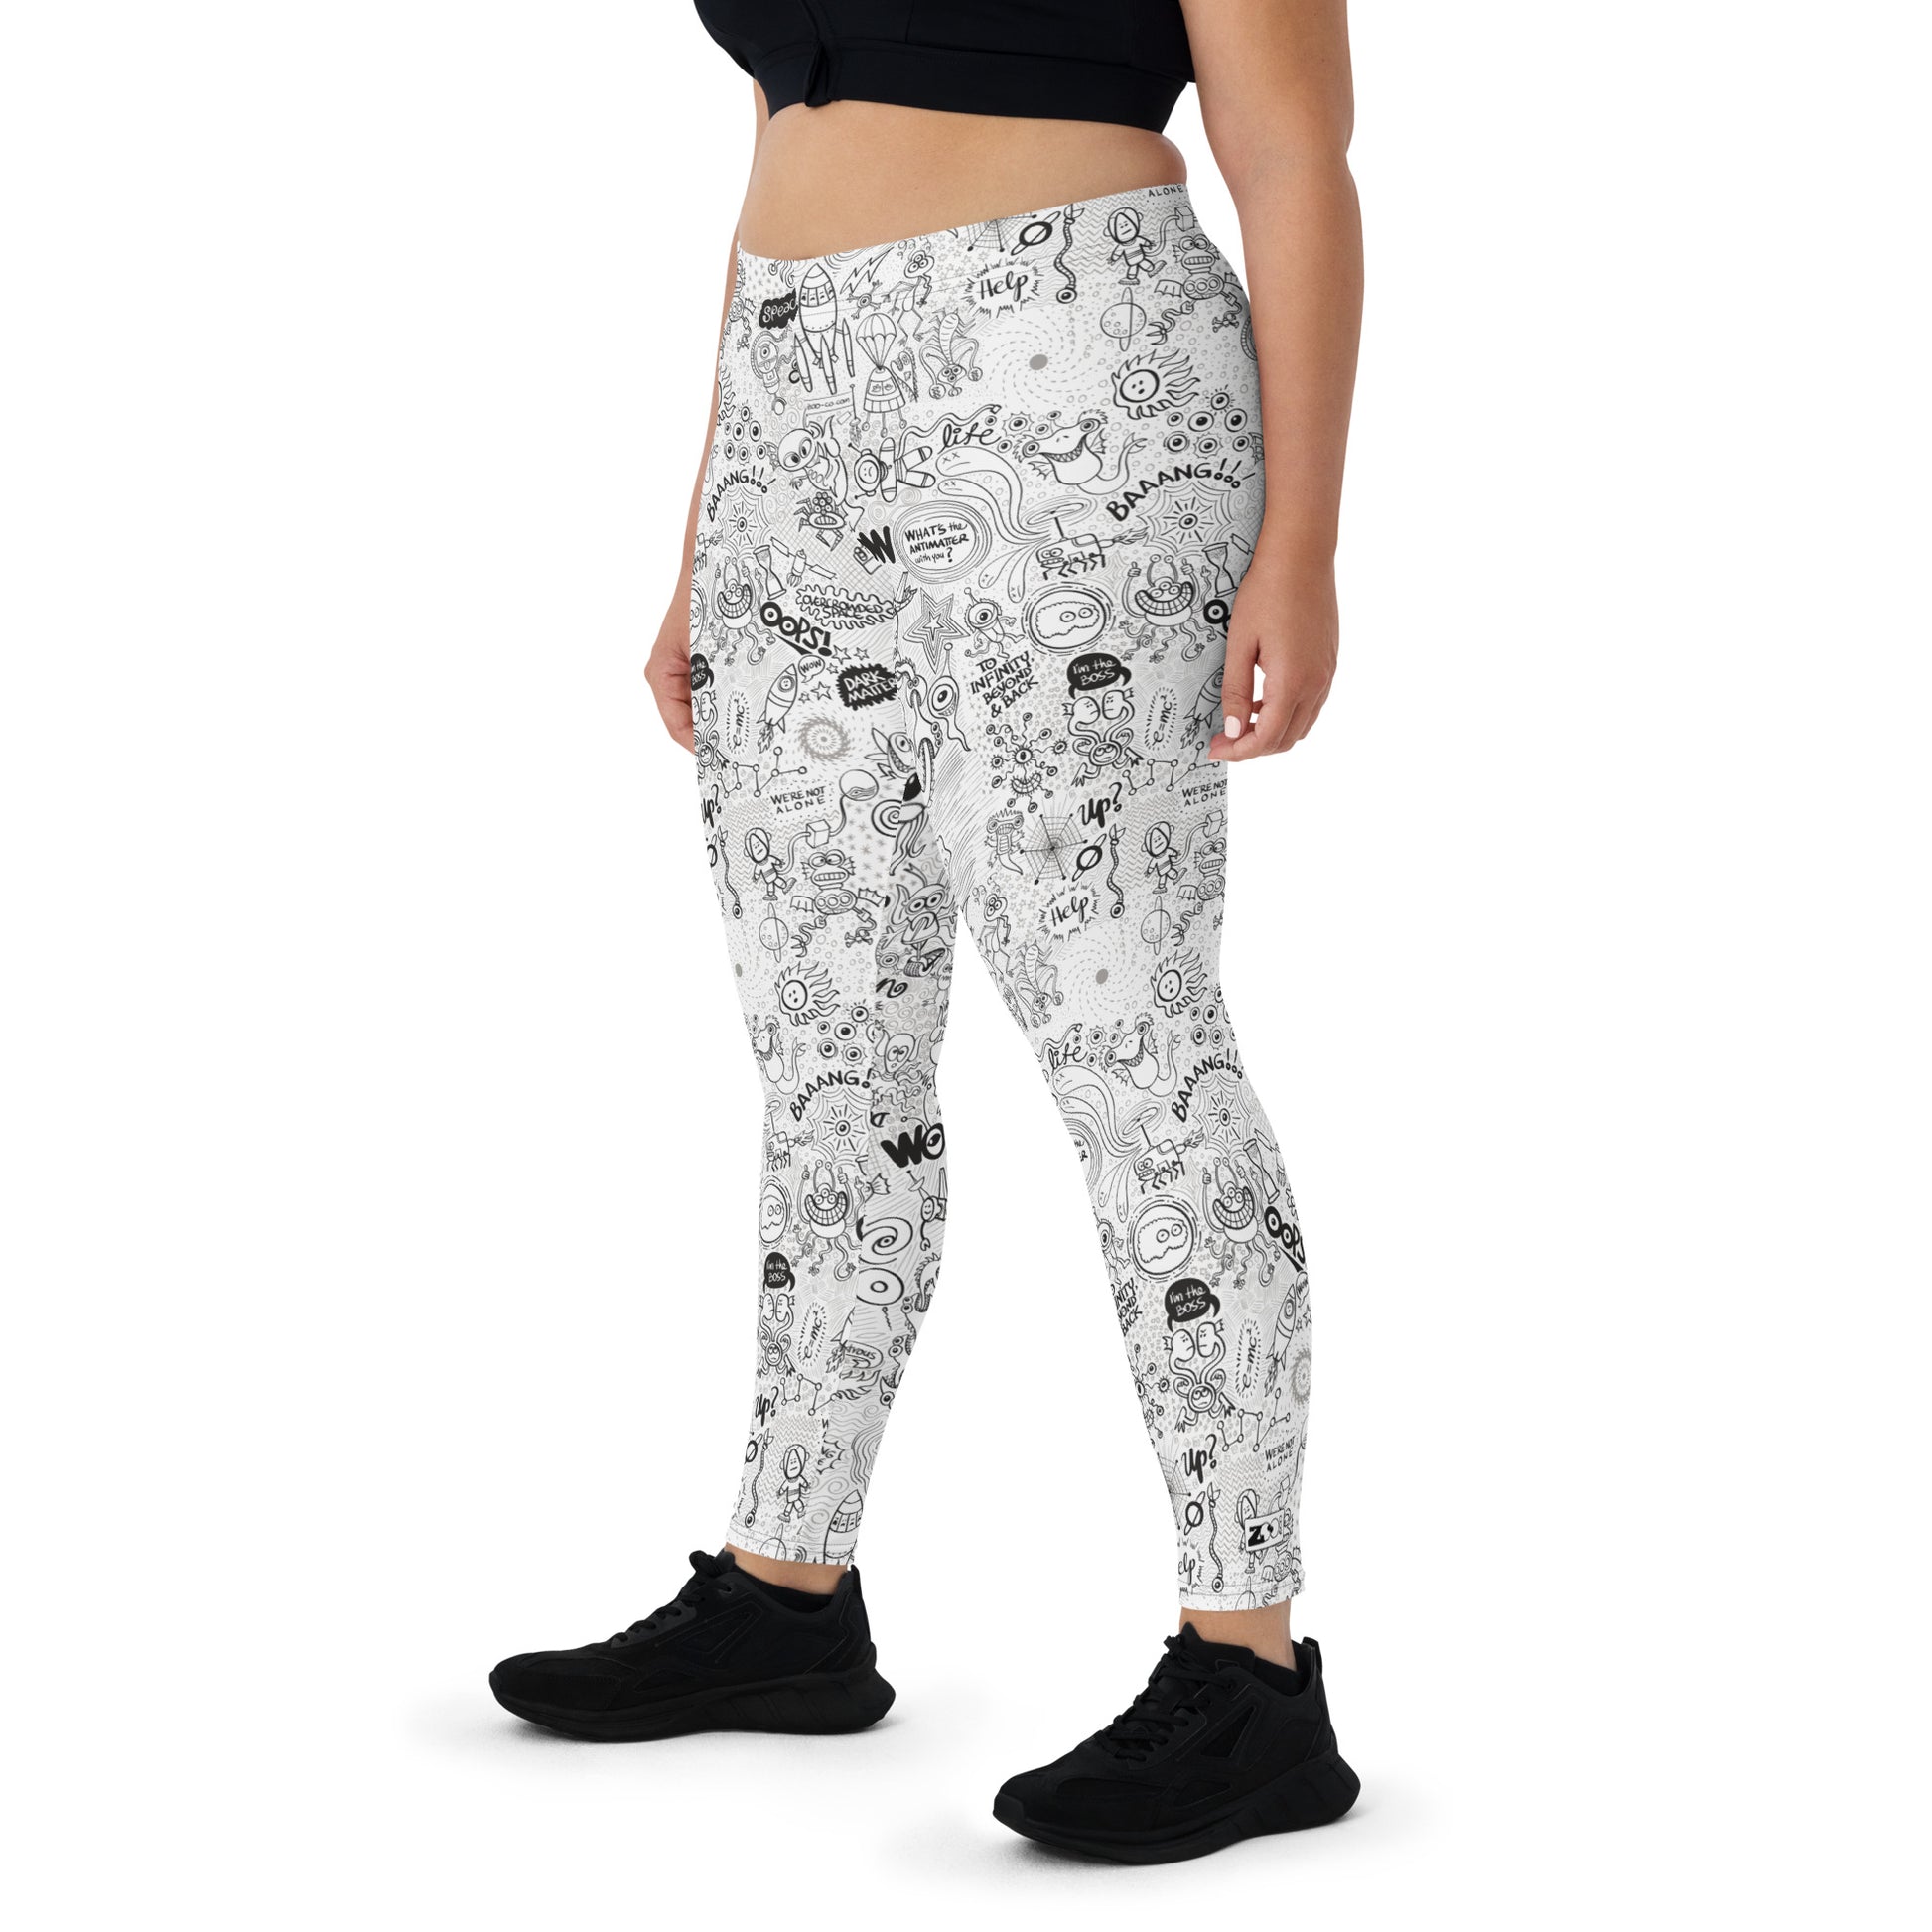 Celebrating the most comprehensive Doodle art of the universe Leggings. Overview